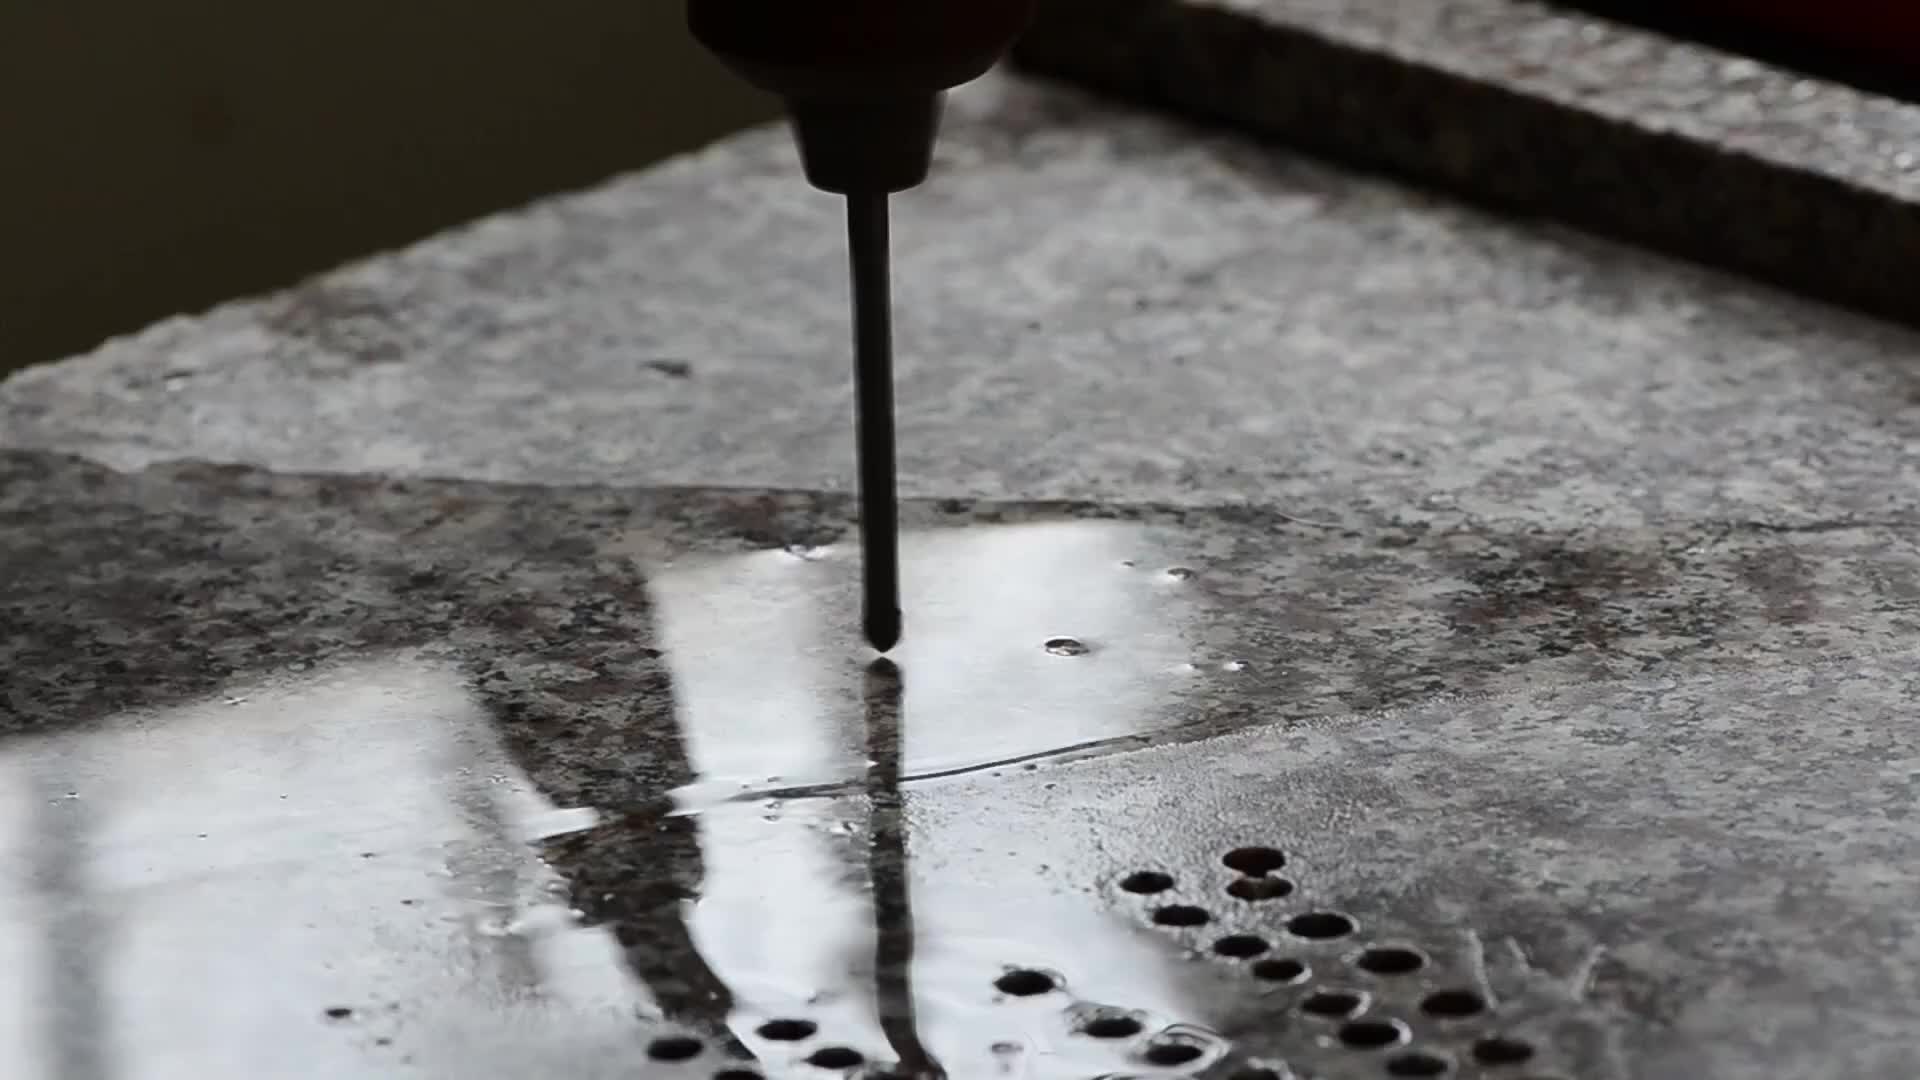 Marble Drilling Test